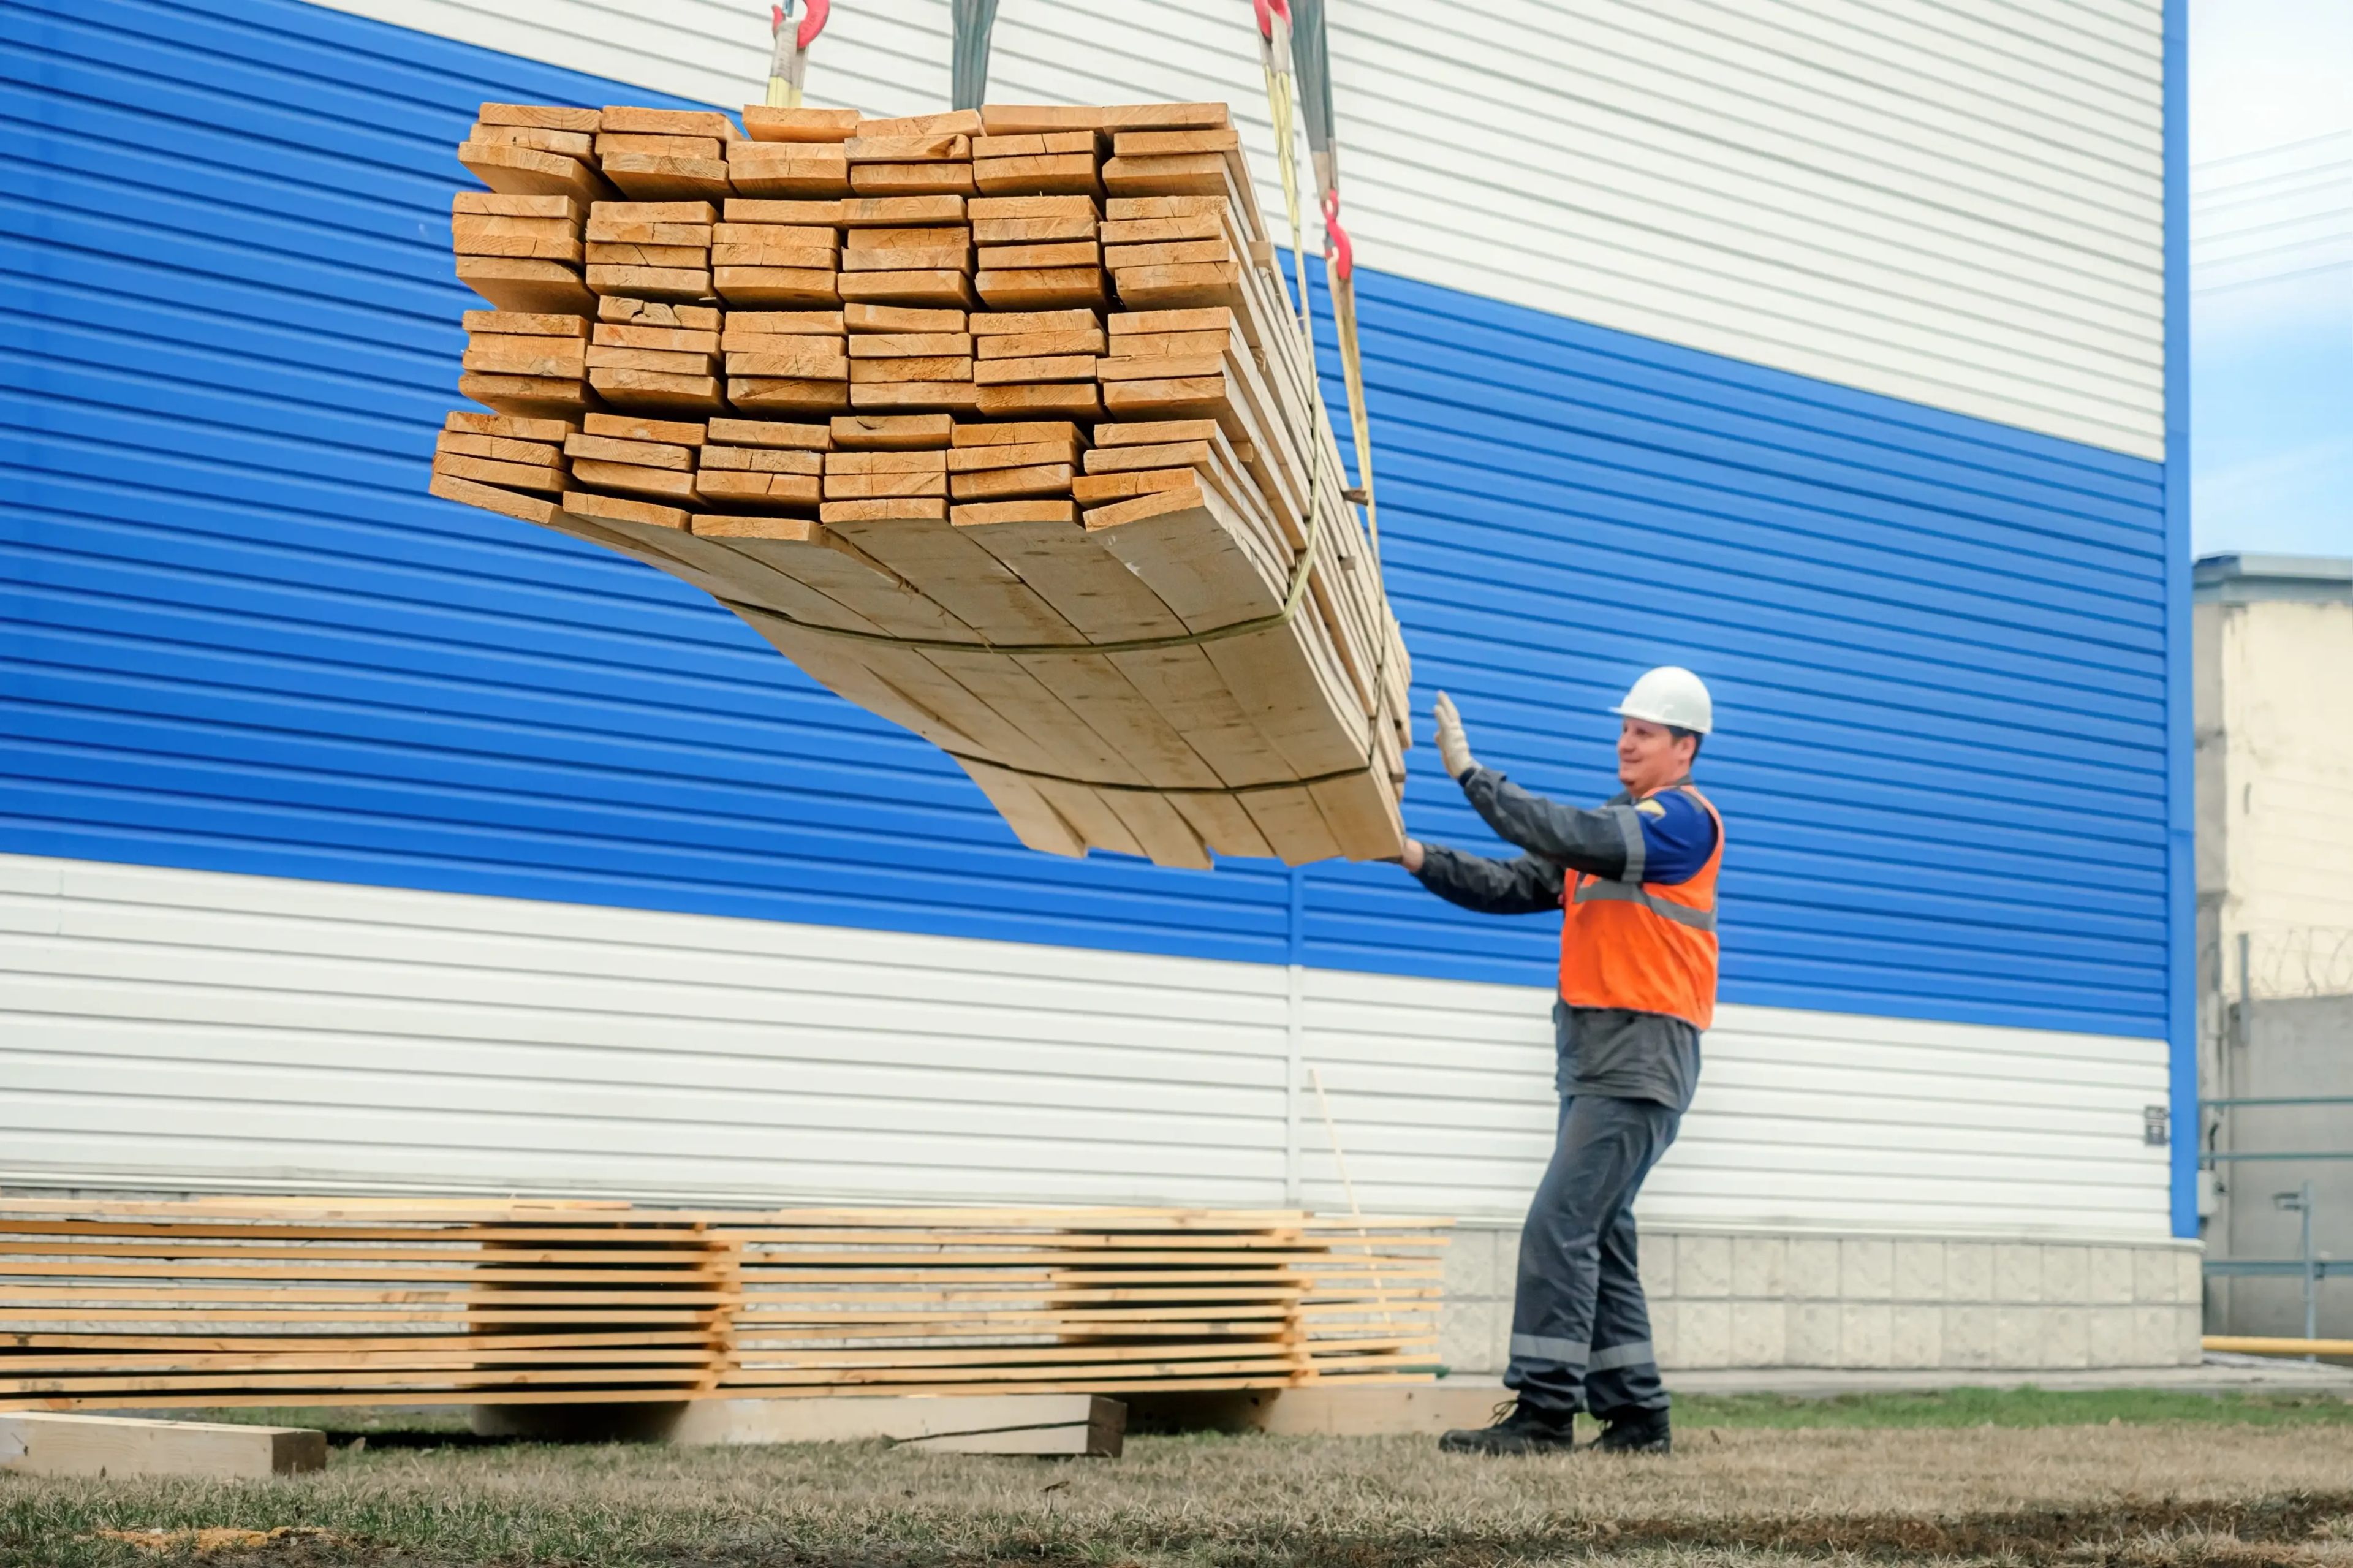 Worker at a lumber building materials supply store